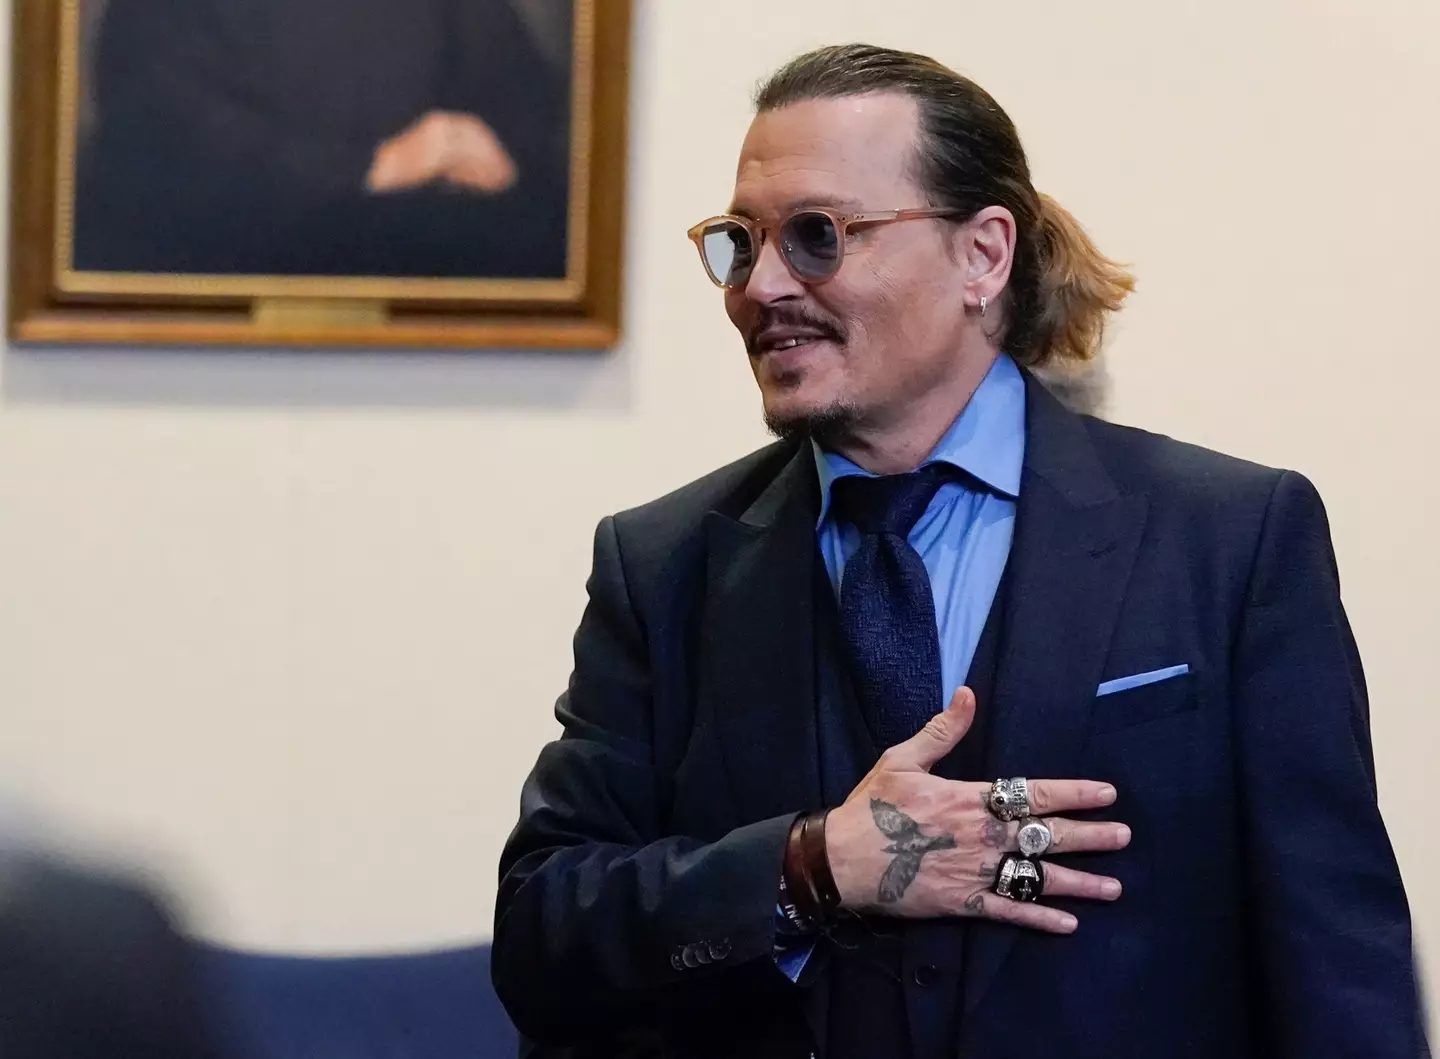 Depp was awarded more than $10 million in damages.